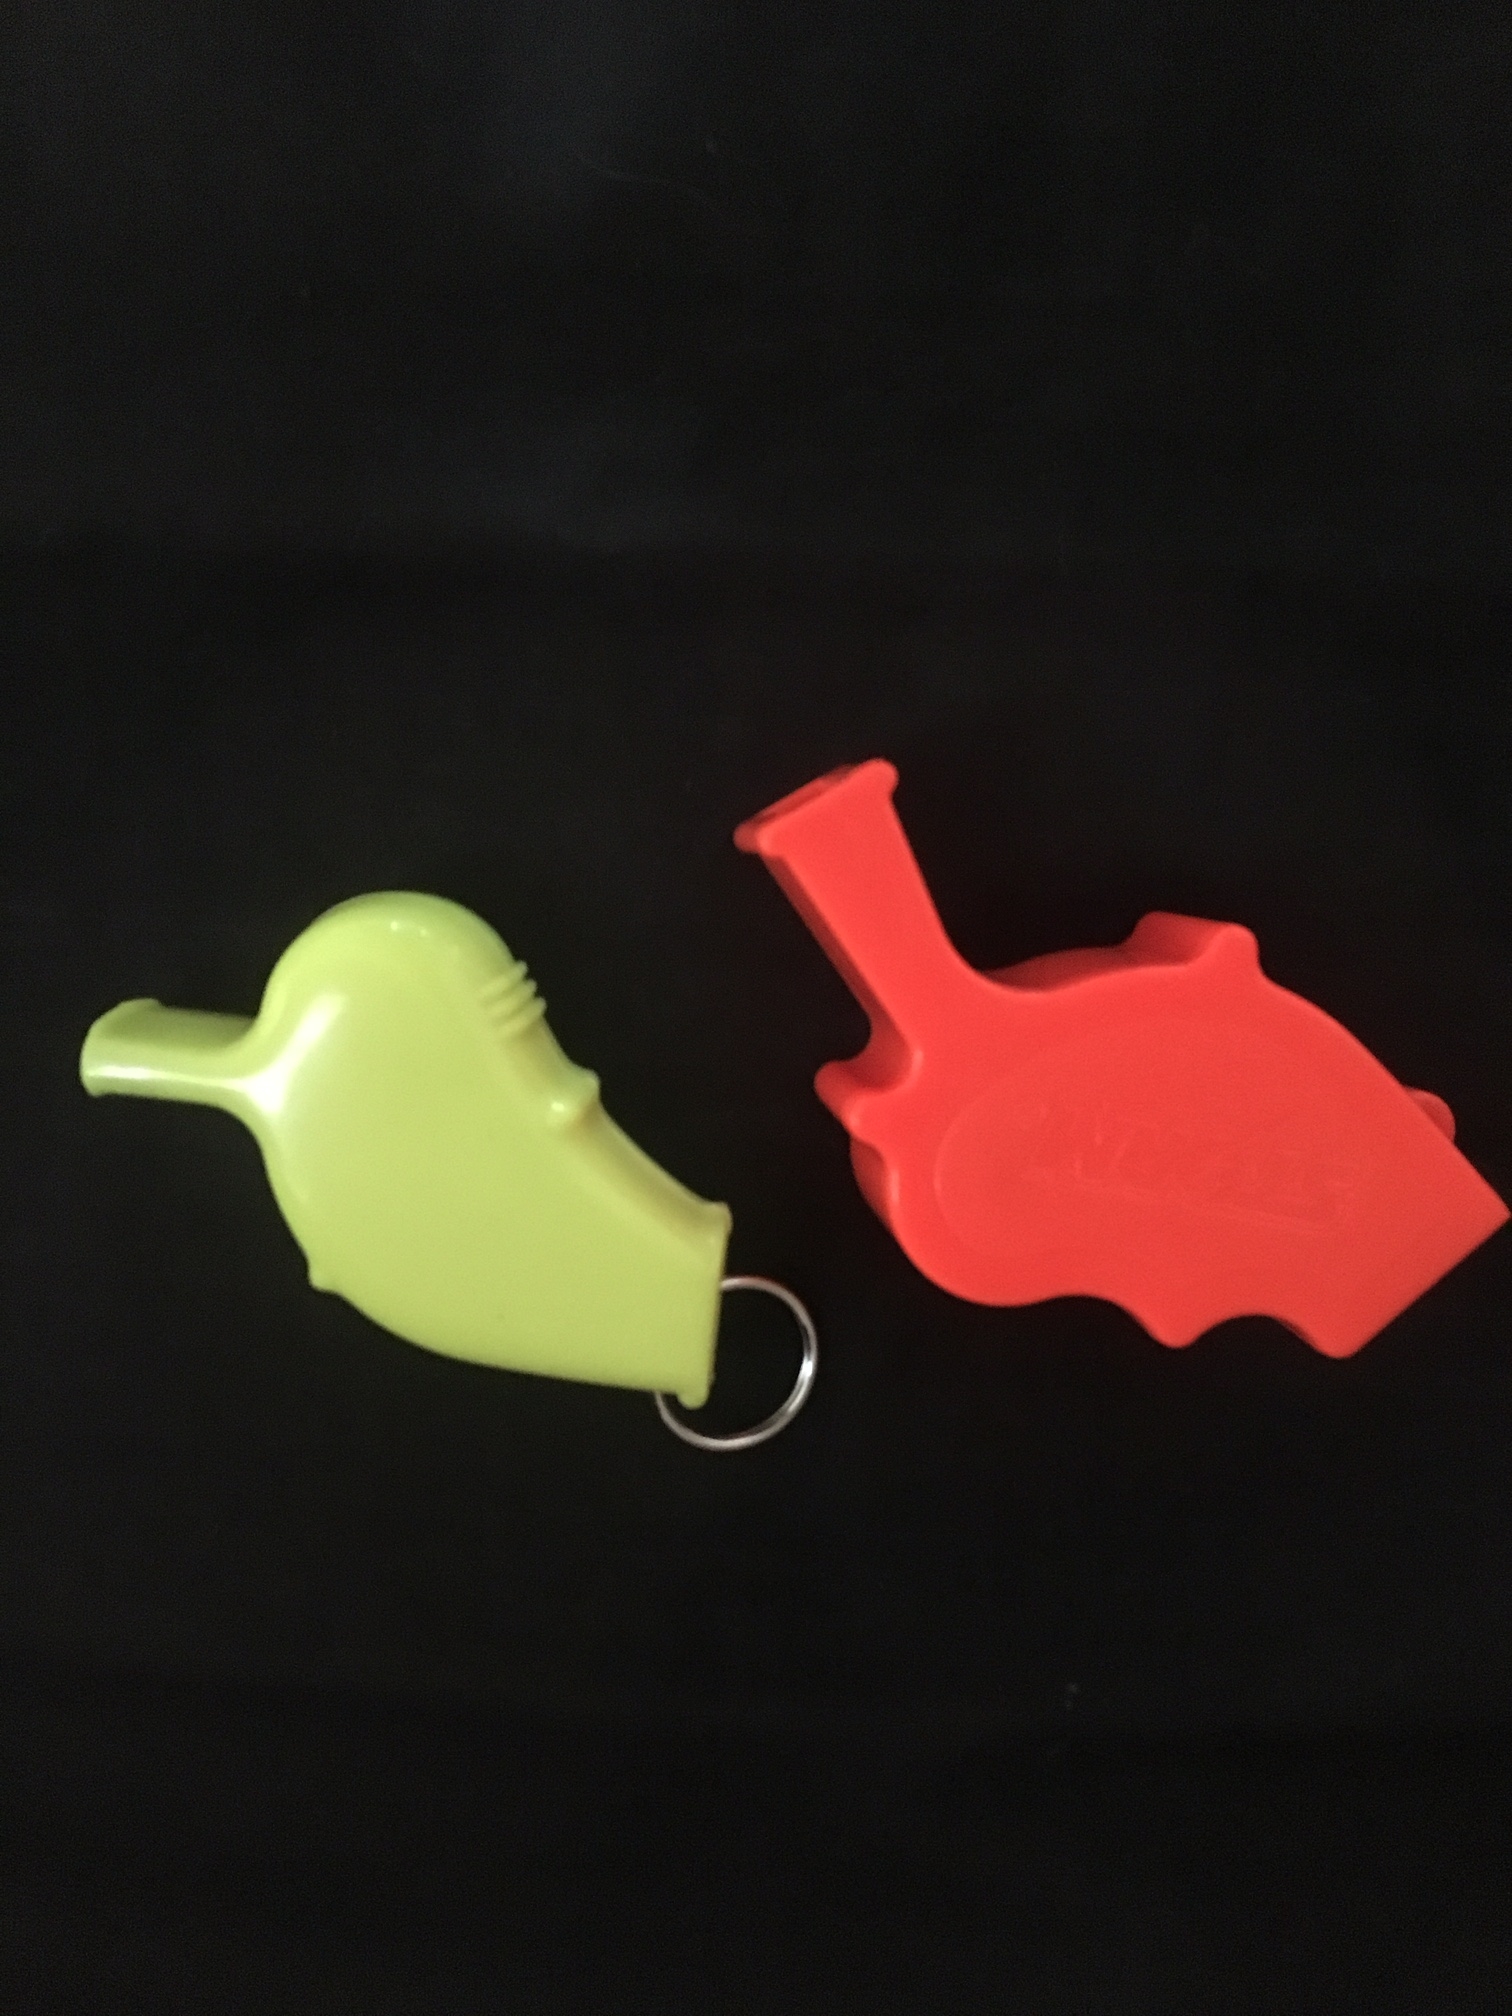 Storm Whistles that work under water and are the loudest whistle in the world - made in a bird design with plastic injection molding